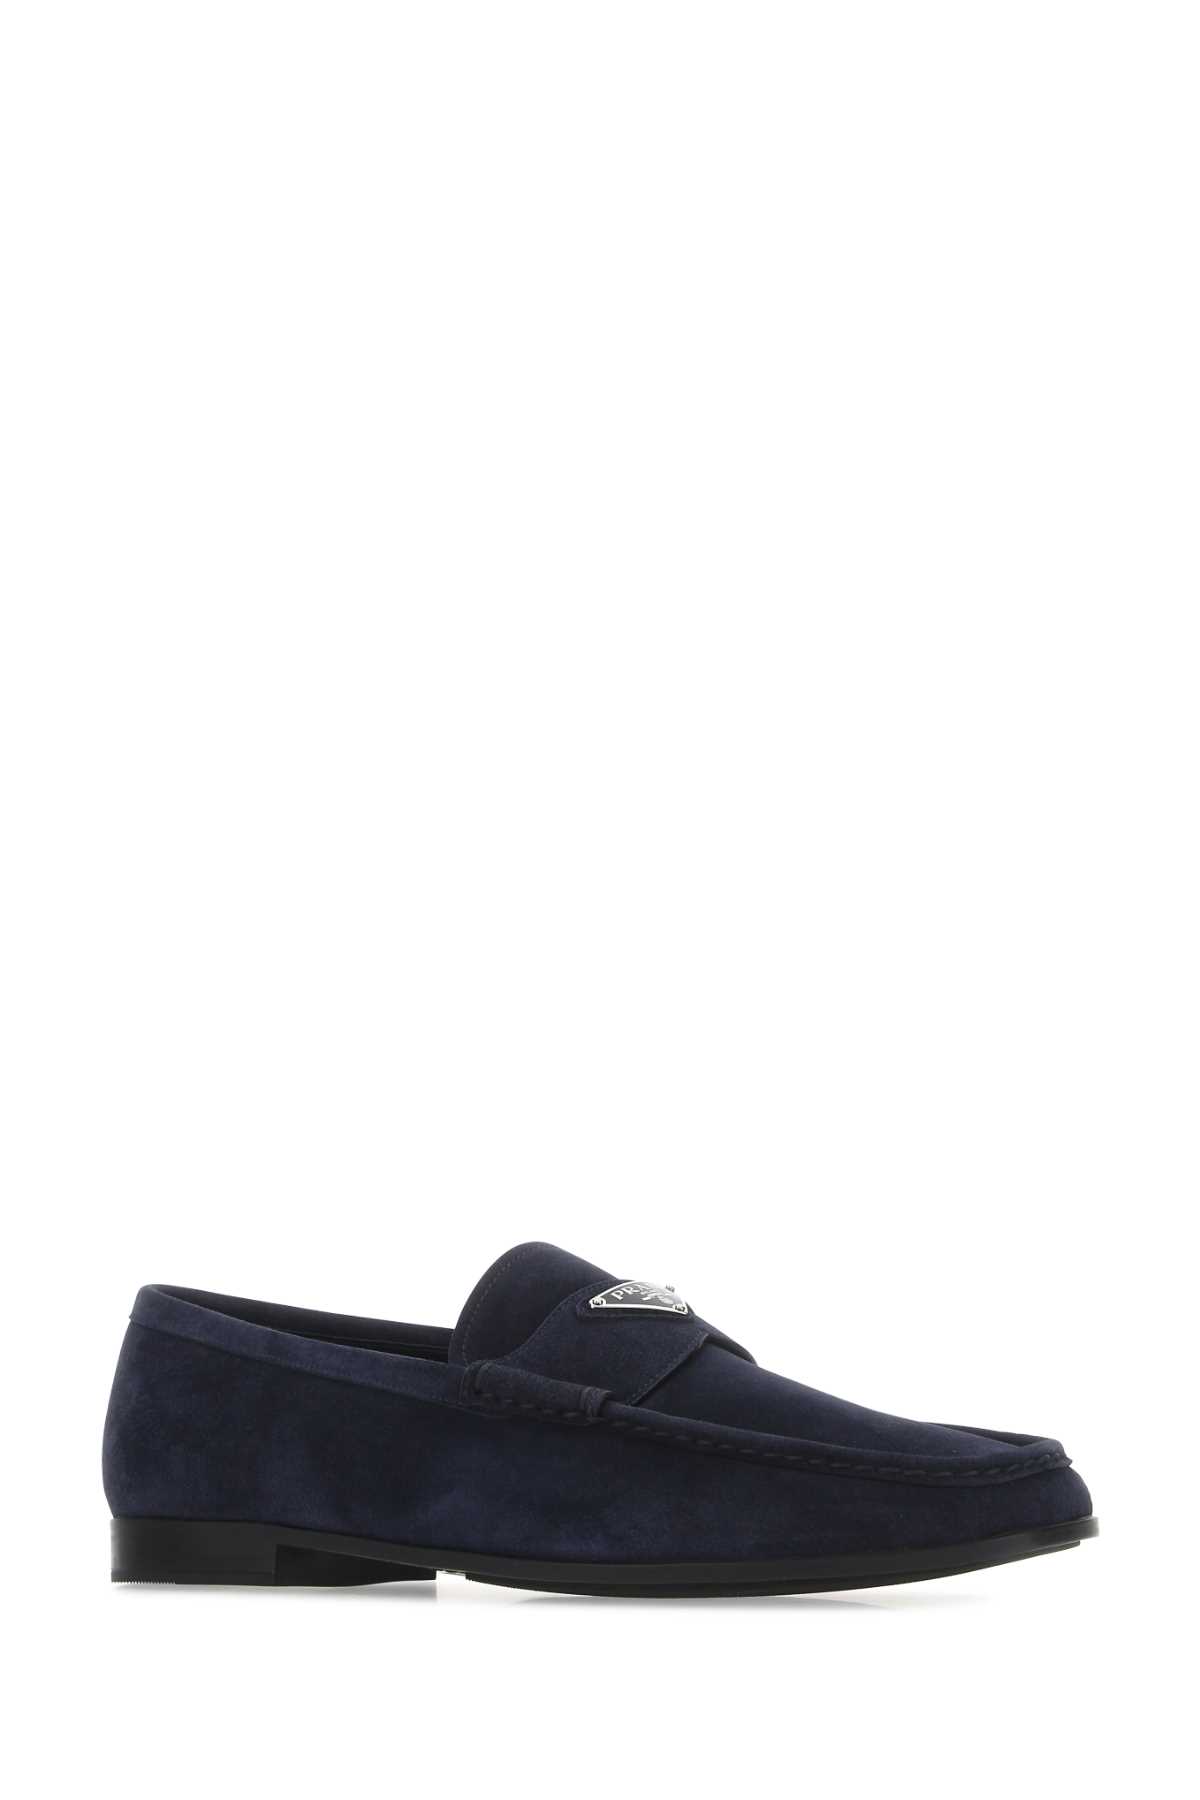 Prada Navy Blue Suede Loafers In F0008